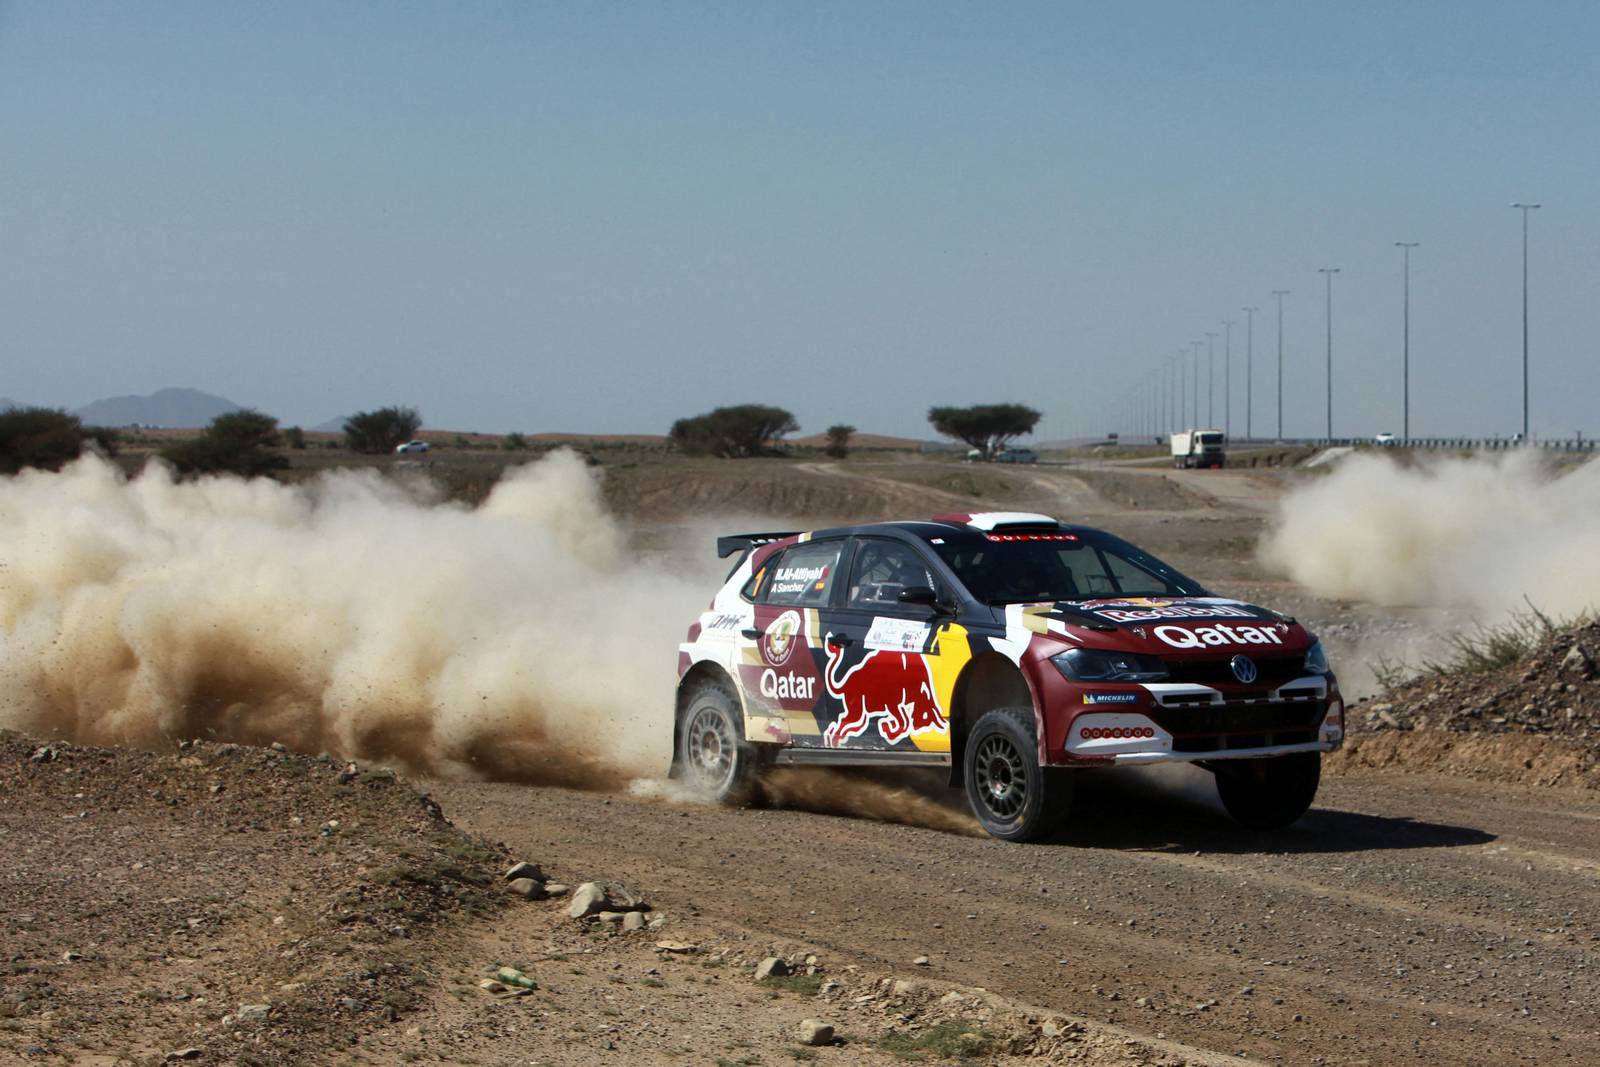 Oman Rally Sohar International 2022 in pictures